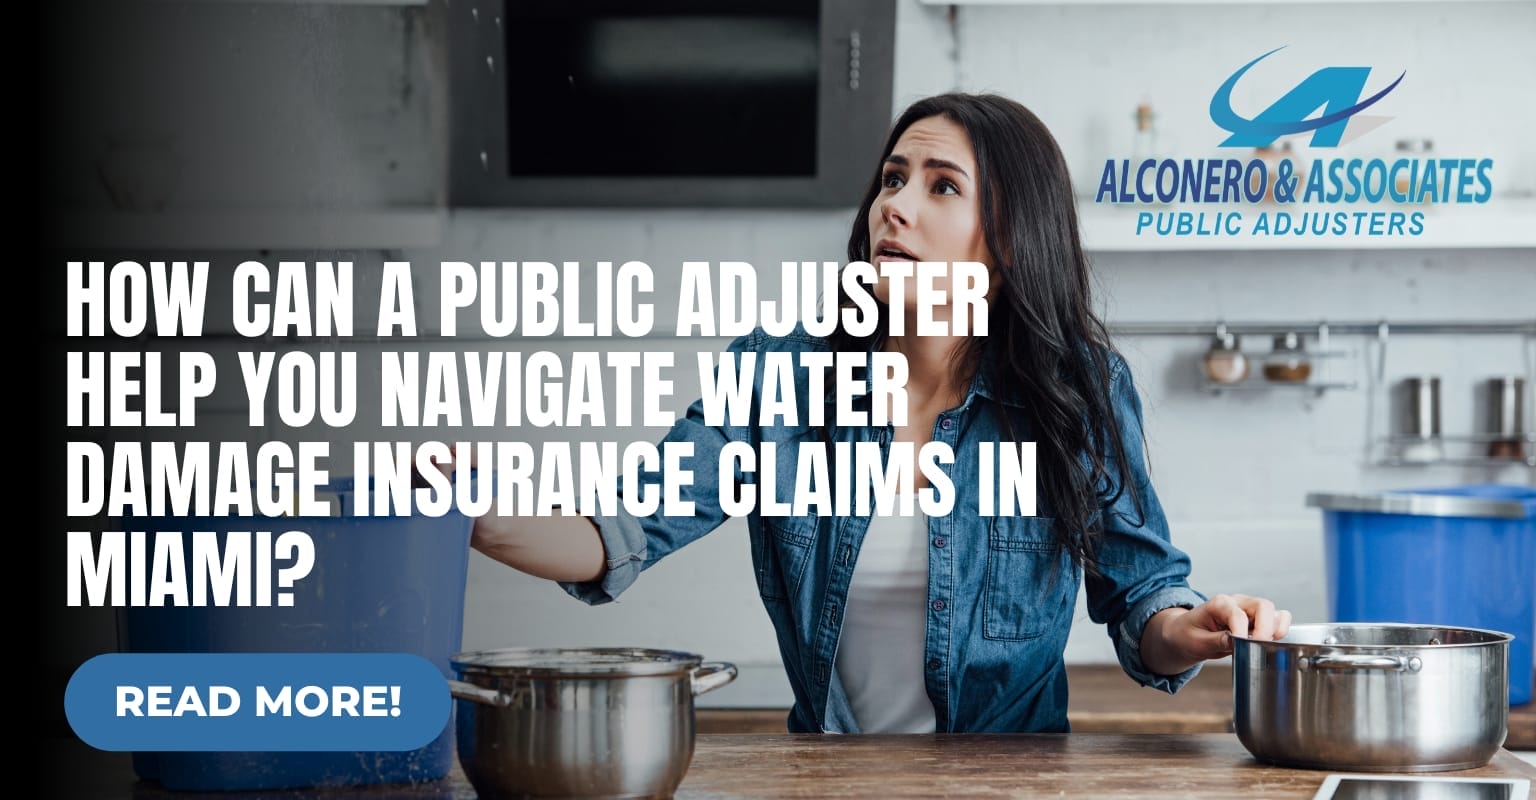 How Can a Public Adjuster Help You Navigate Water Damage Insurance Claims in Miami?